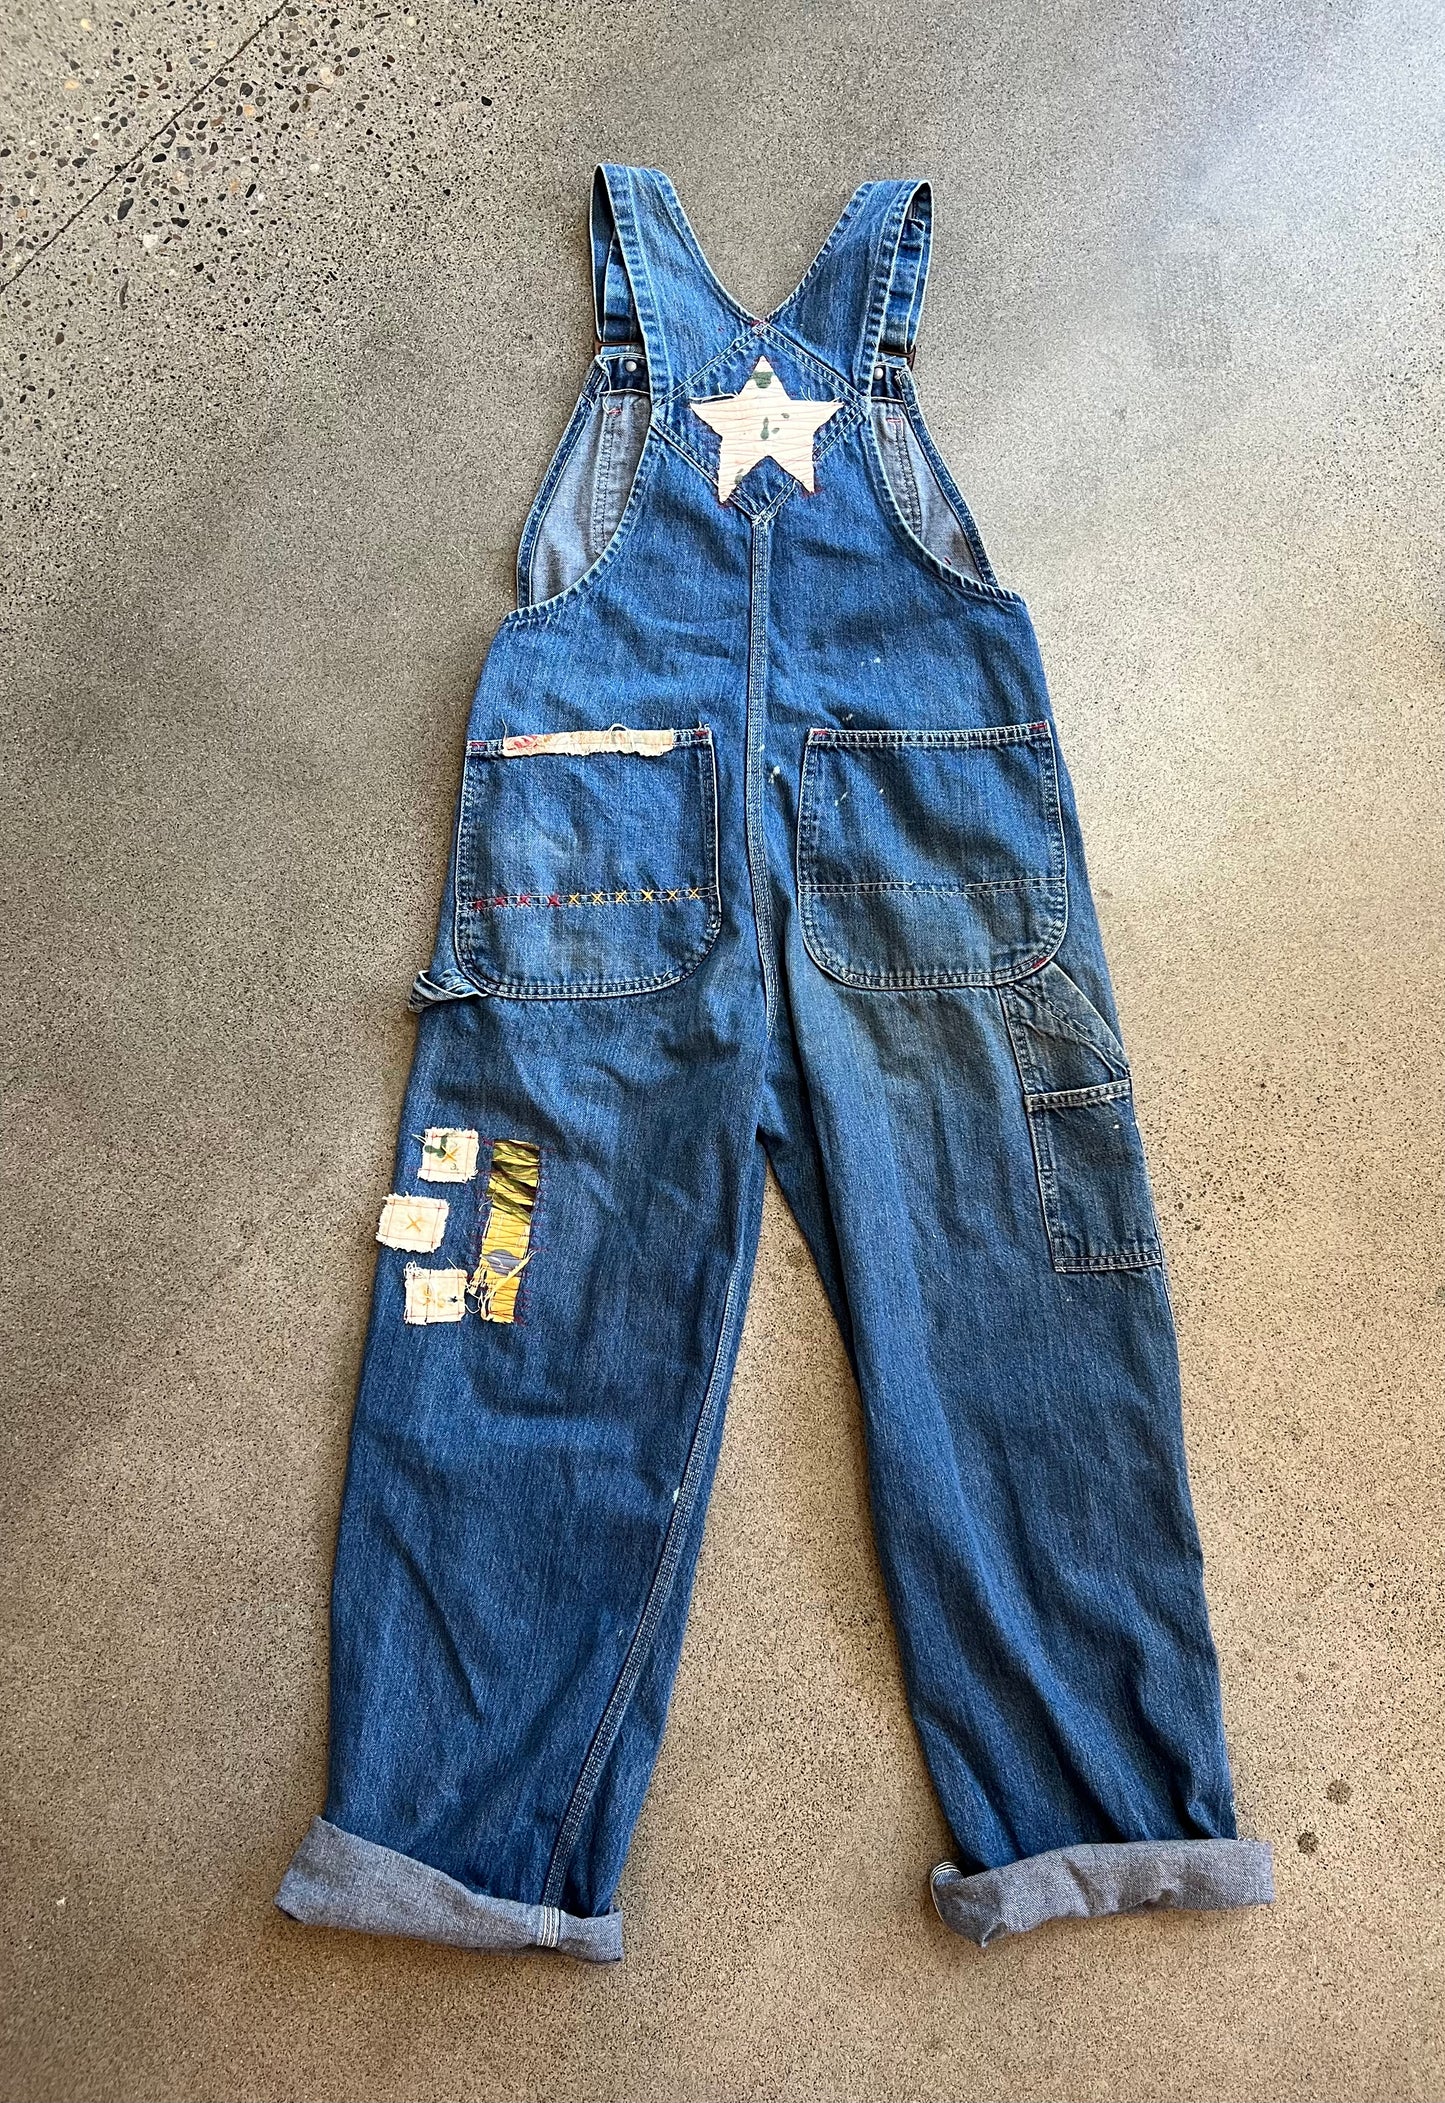 Origami Crane Vintage Overalls - Patched